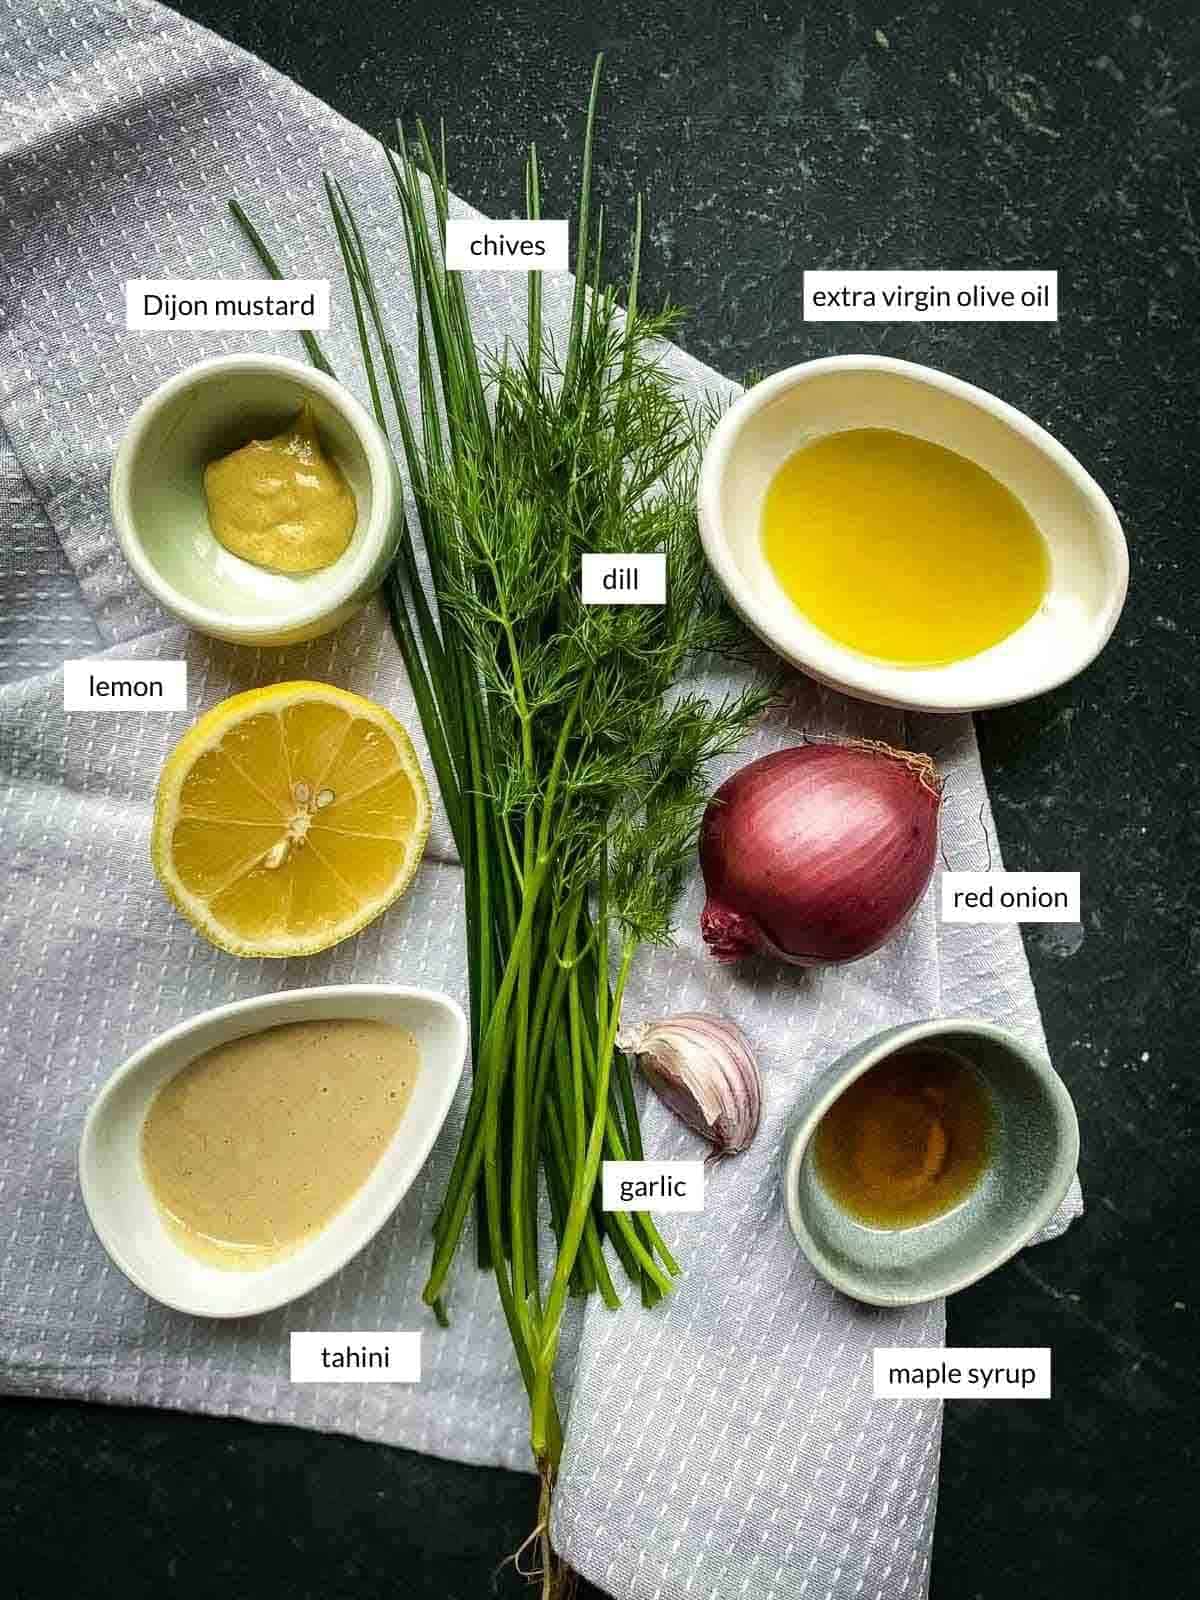 tahini ranch ingredients Dijon mustard, chives, dill, extra virgin olive oil, lemon tahini, garlic, red onion, maple syrup lined up on a grey napkin